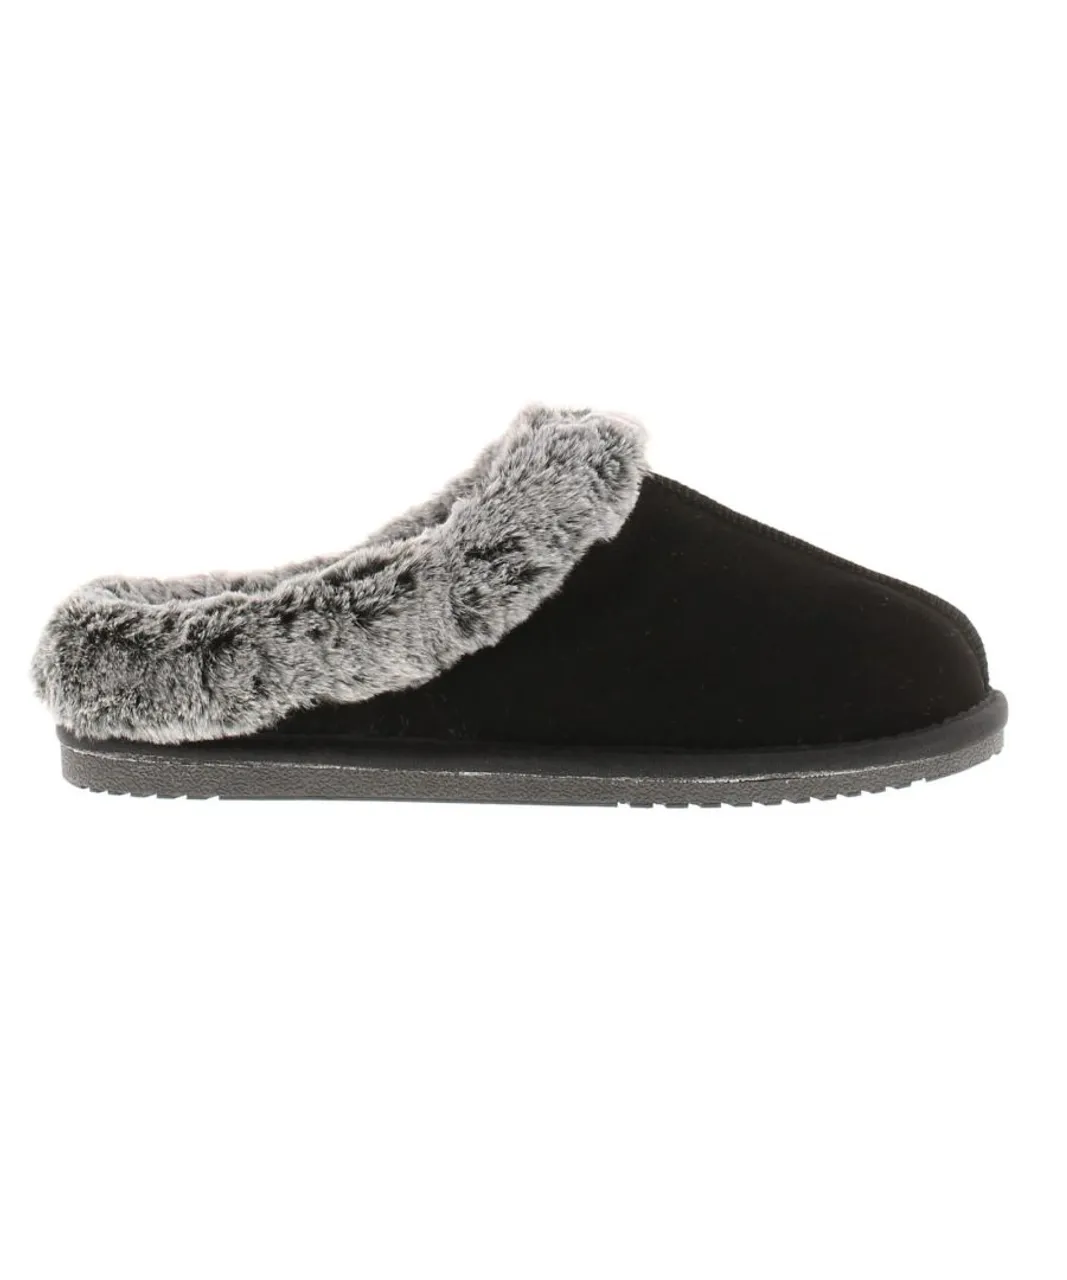 Hush Puppies Womens Slippers Mule Amara Leather black Leather (archived)